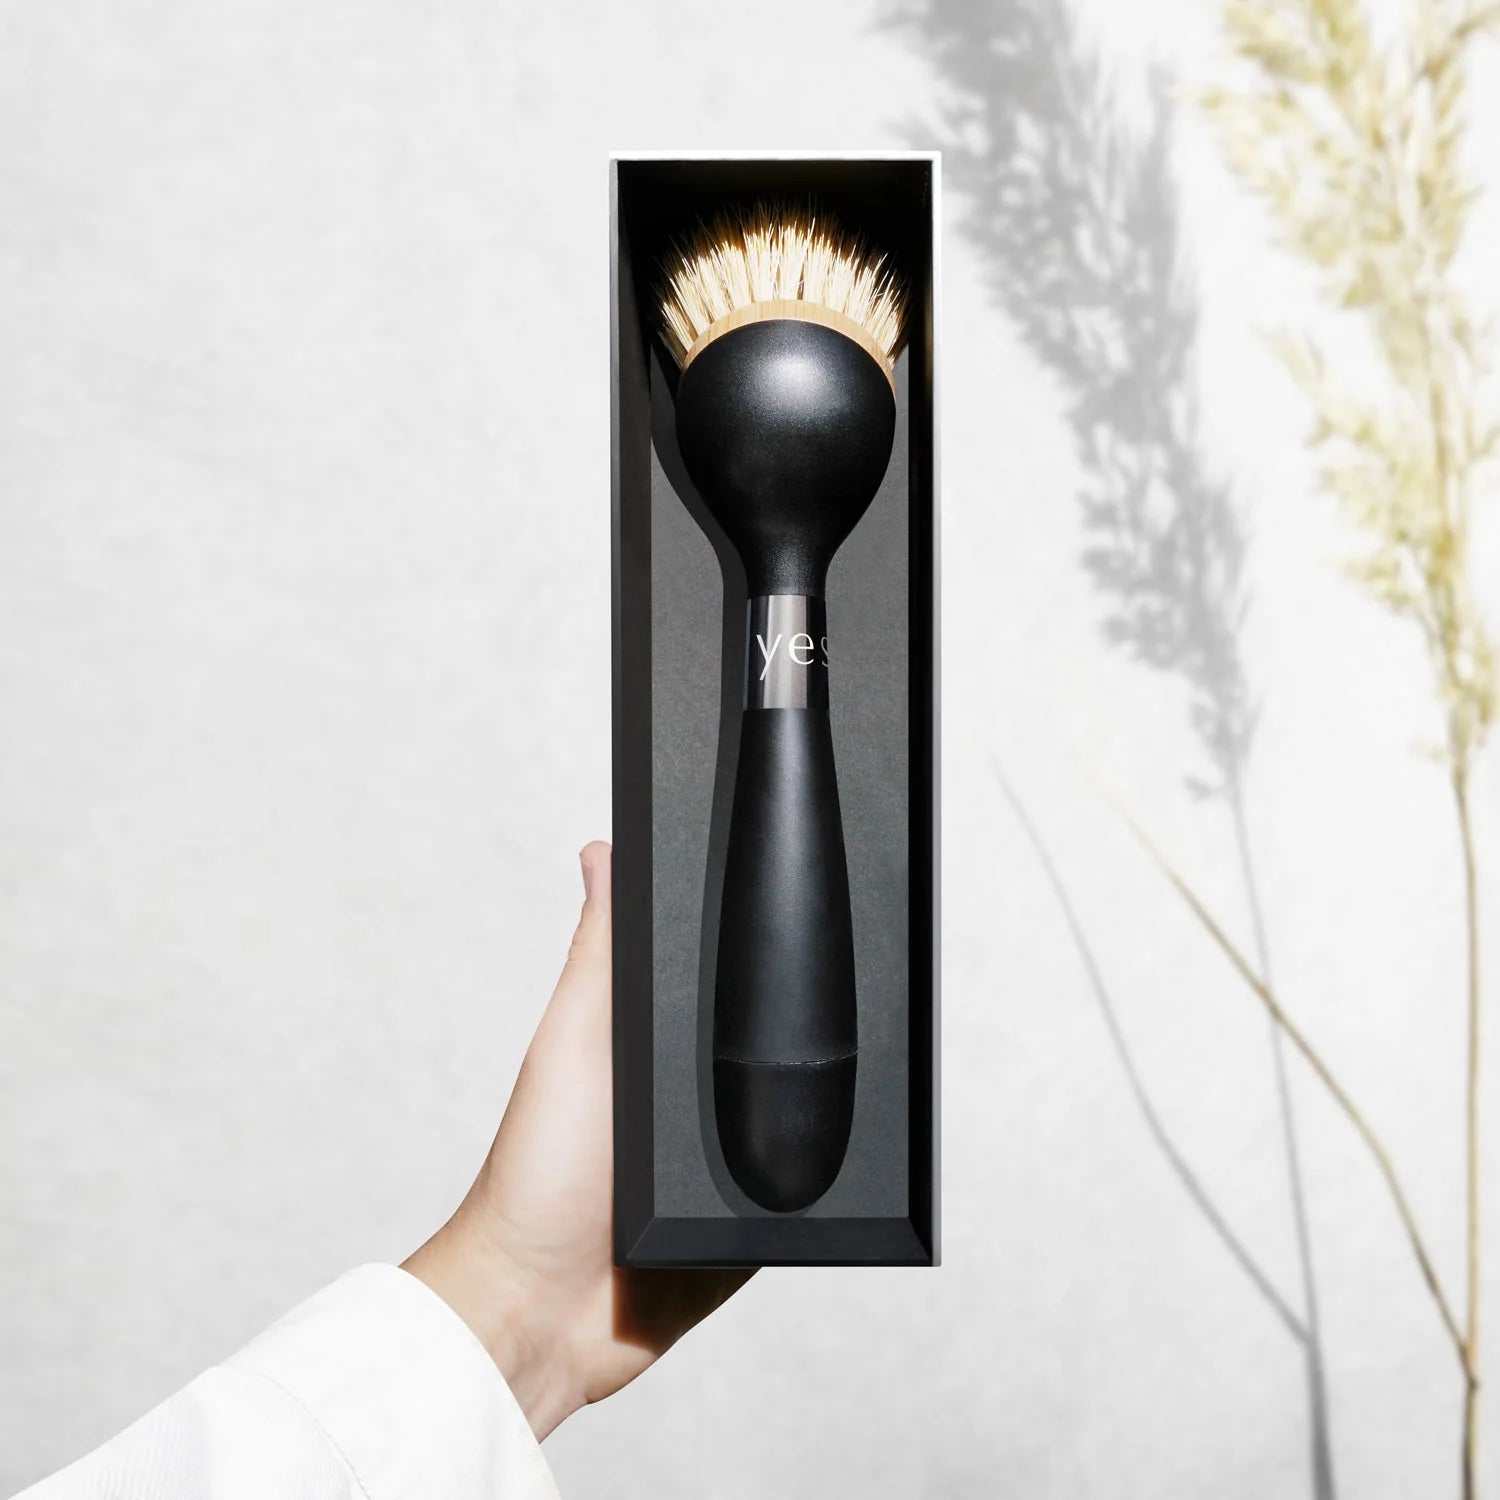 Yesēco - The ONE Brush - The Flower Crate